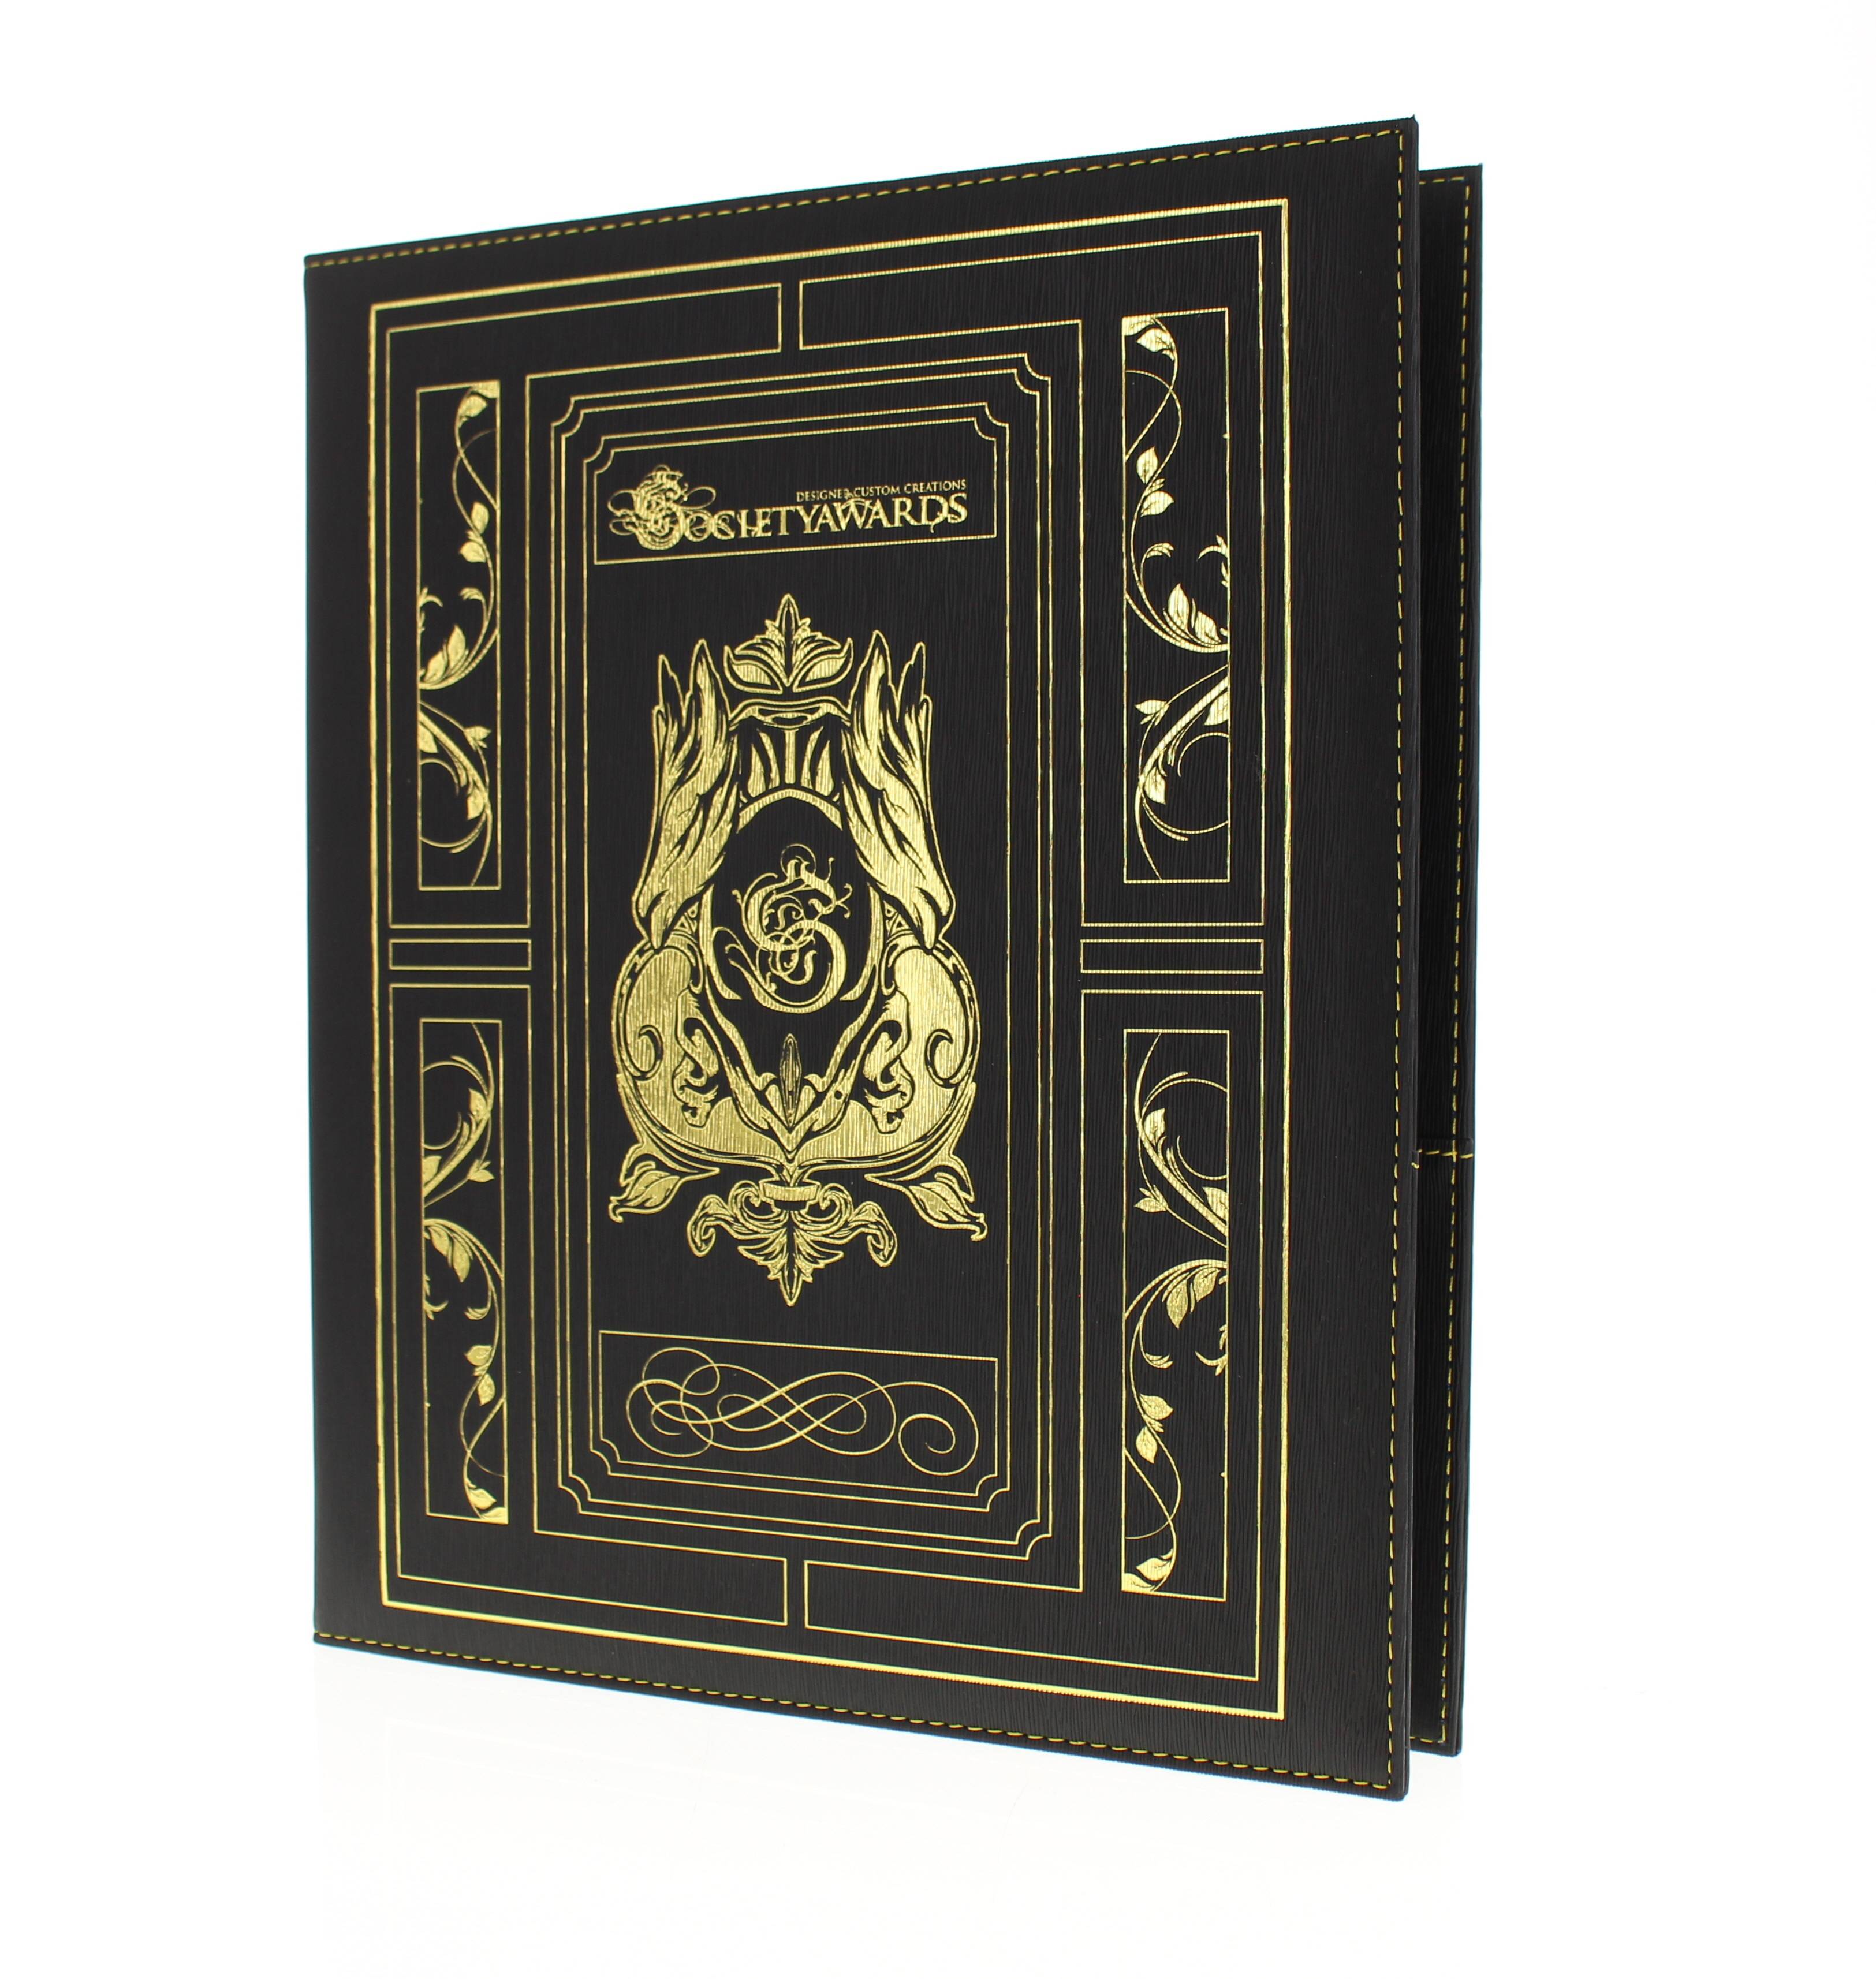 Custom-branded black portfolio with gold embossing, inspired by classic book designs, modern and distinctive in execution.